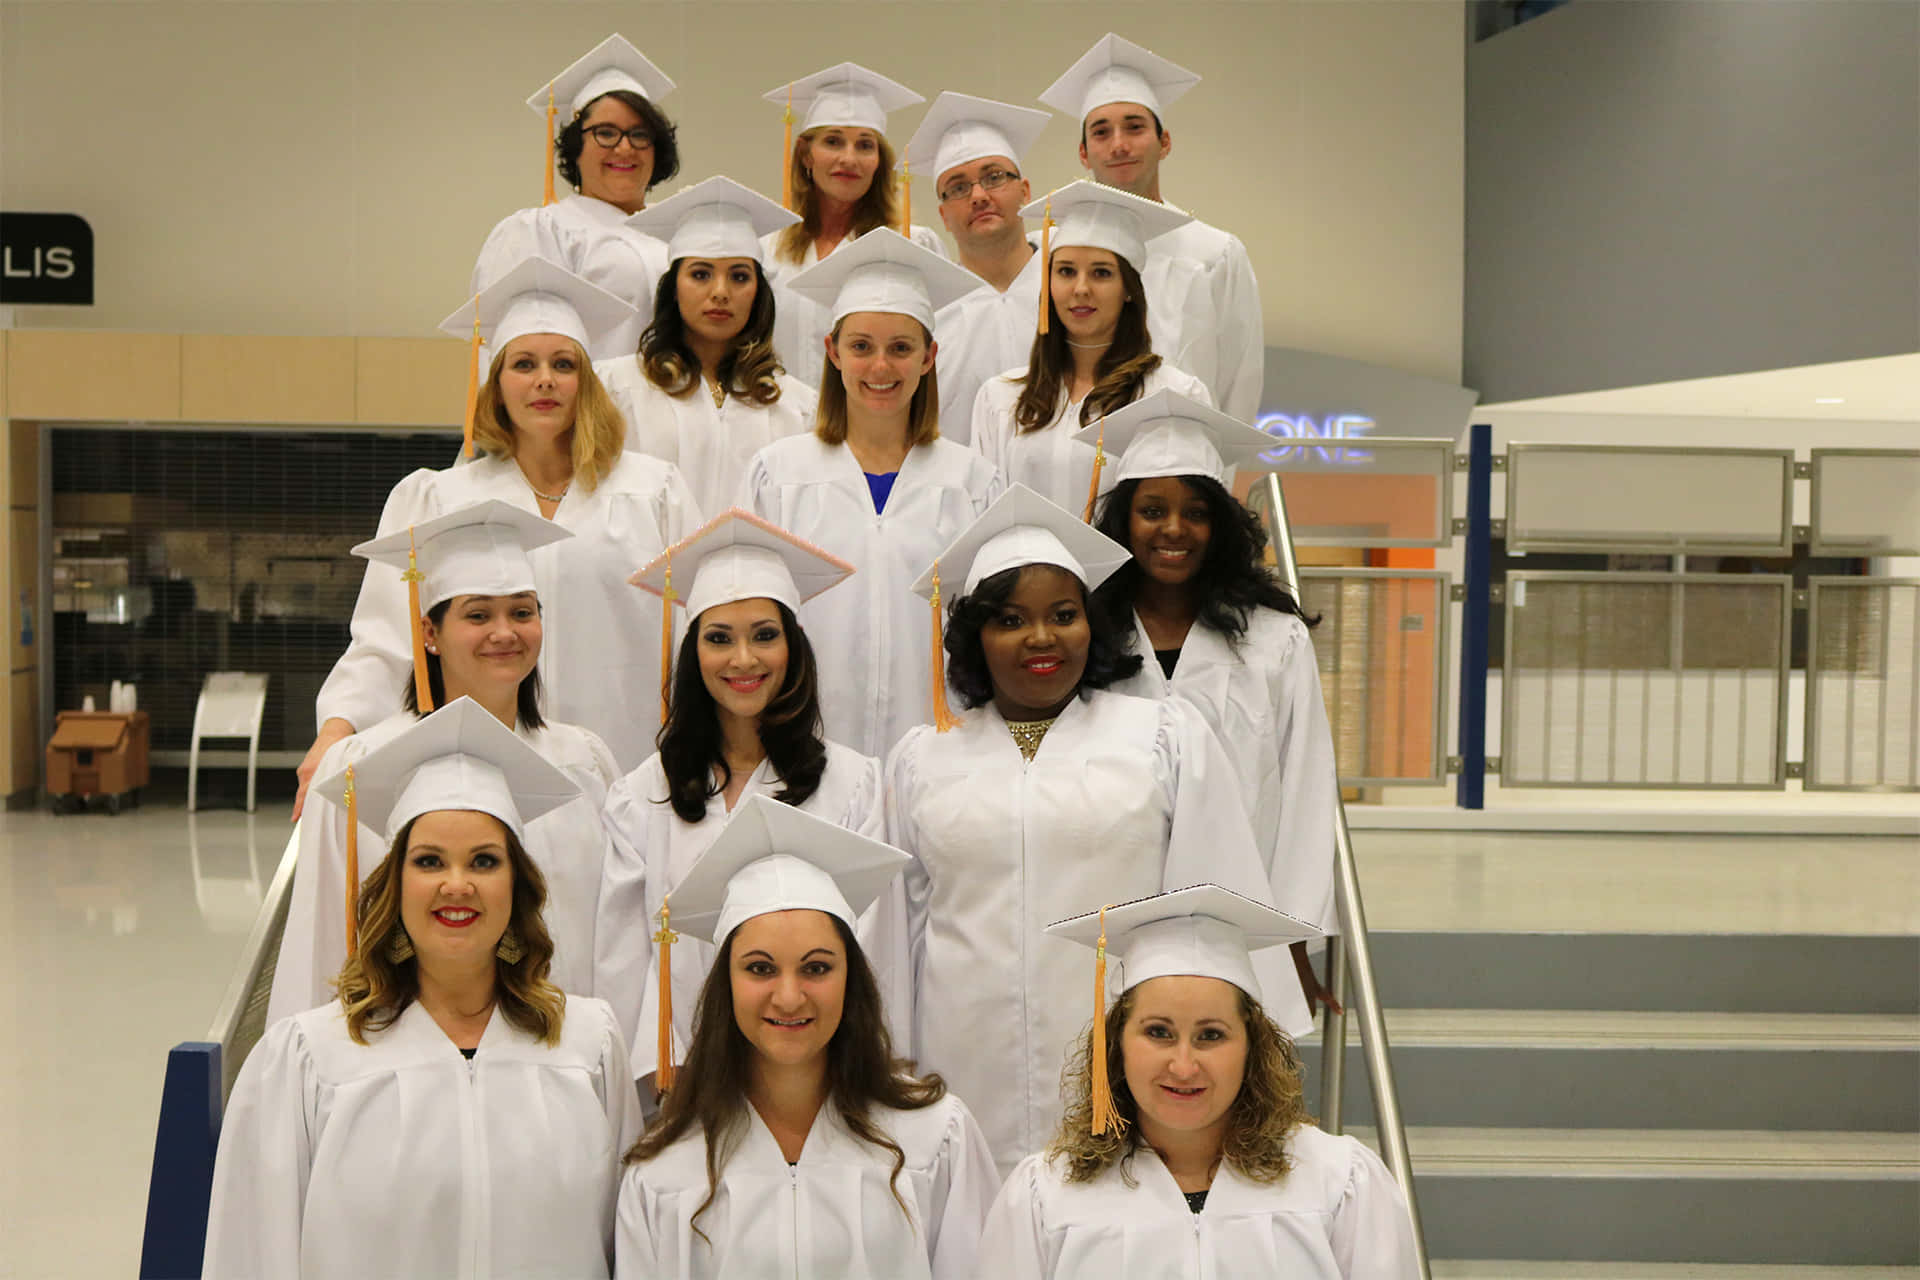 A Group Of Women In White Graduation Gowns Posing For A Photo